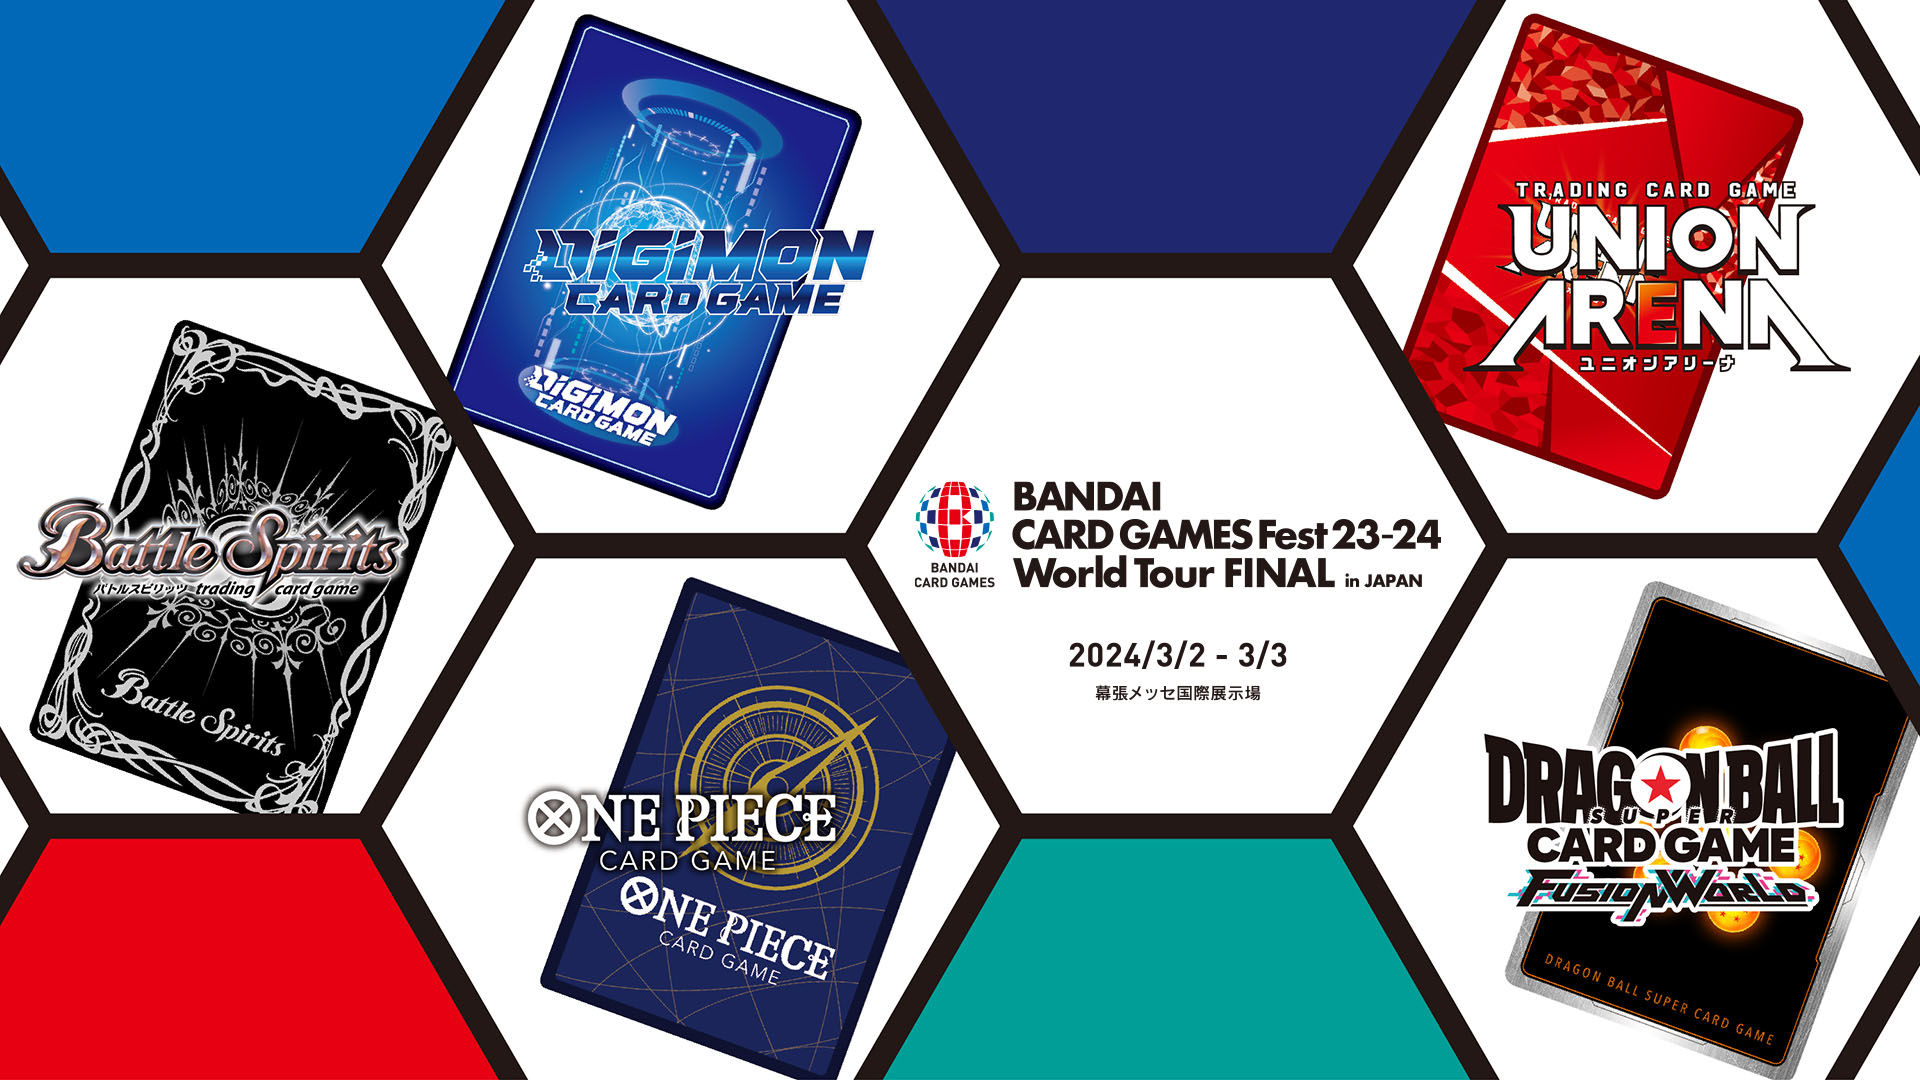 BANDAI CARD GAMES Fest 23-24 World Tour in Los Angeles − EVENTS